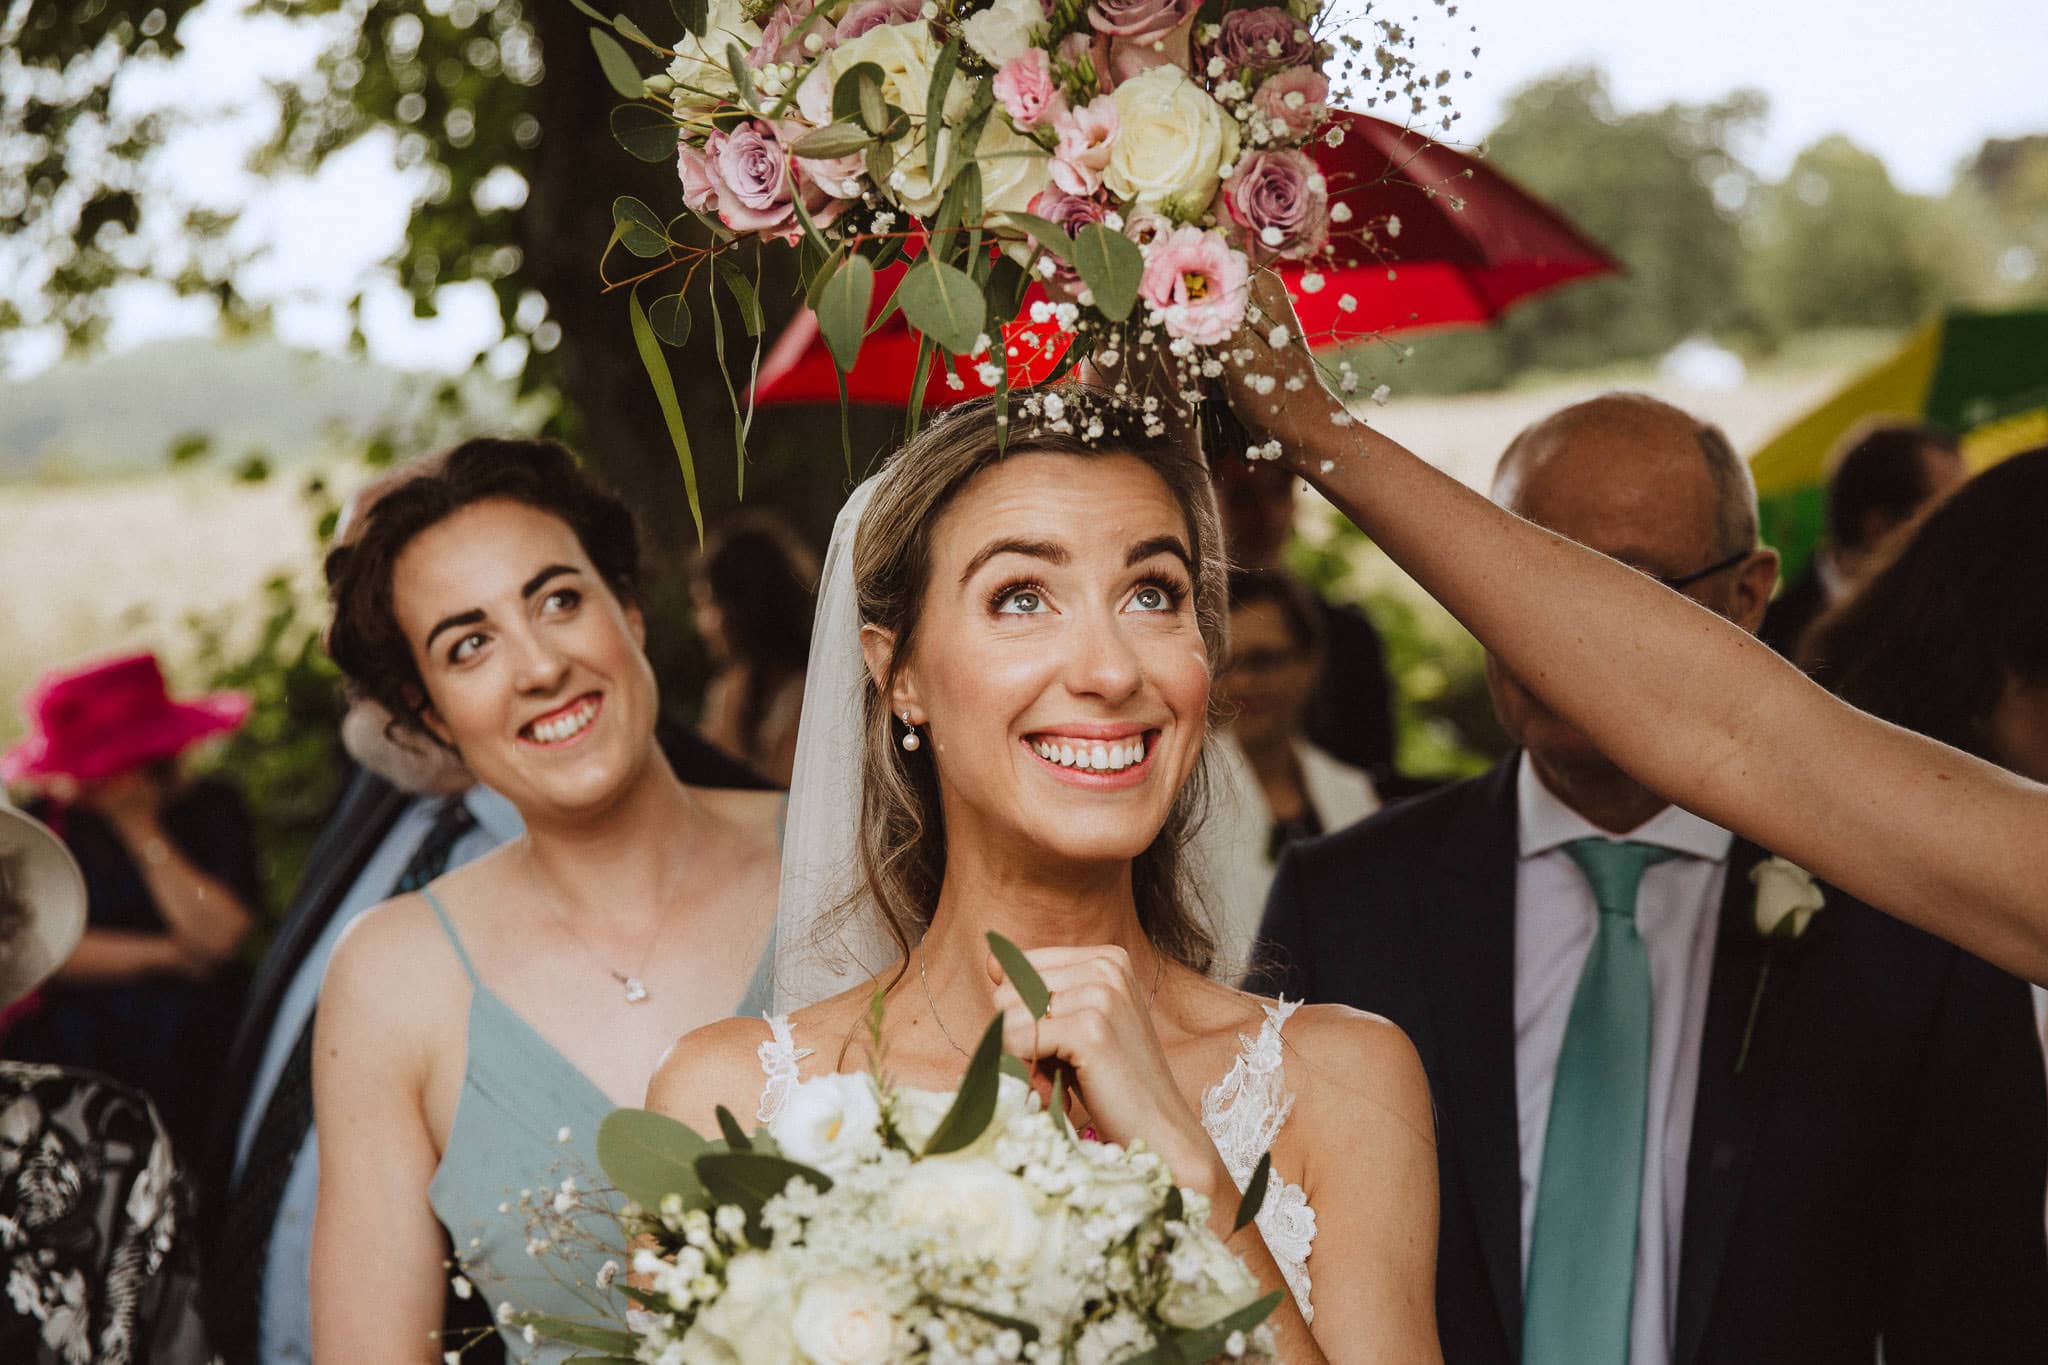 using the bouquet as an umbrella for a rainy day at a Leicestershire wedding